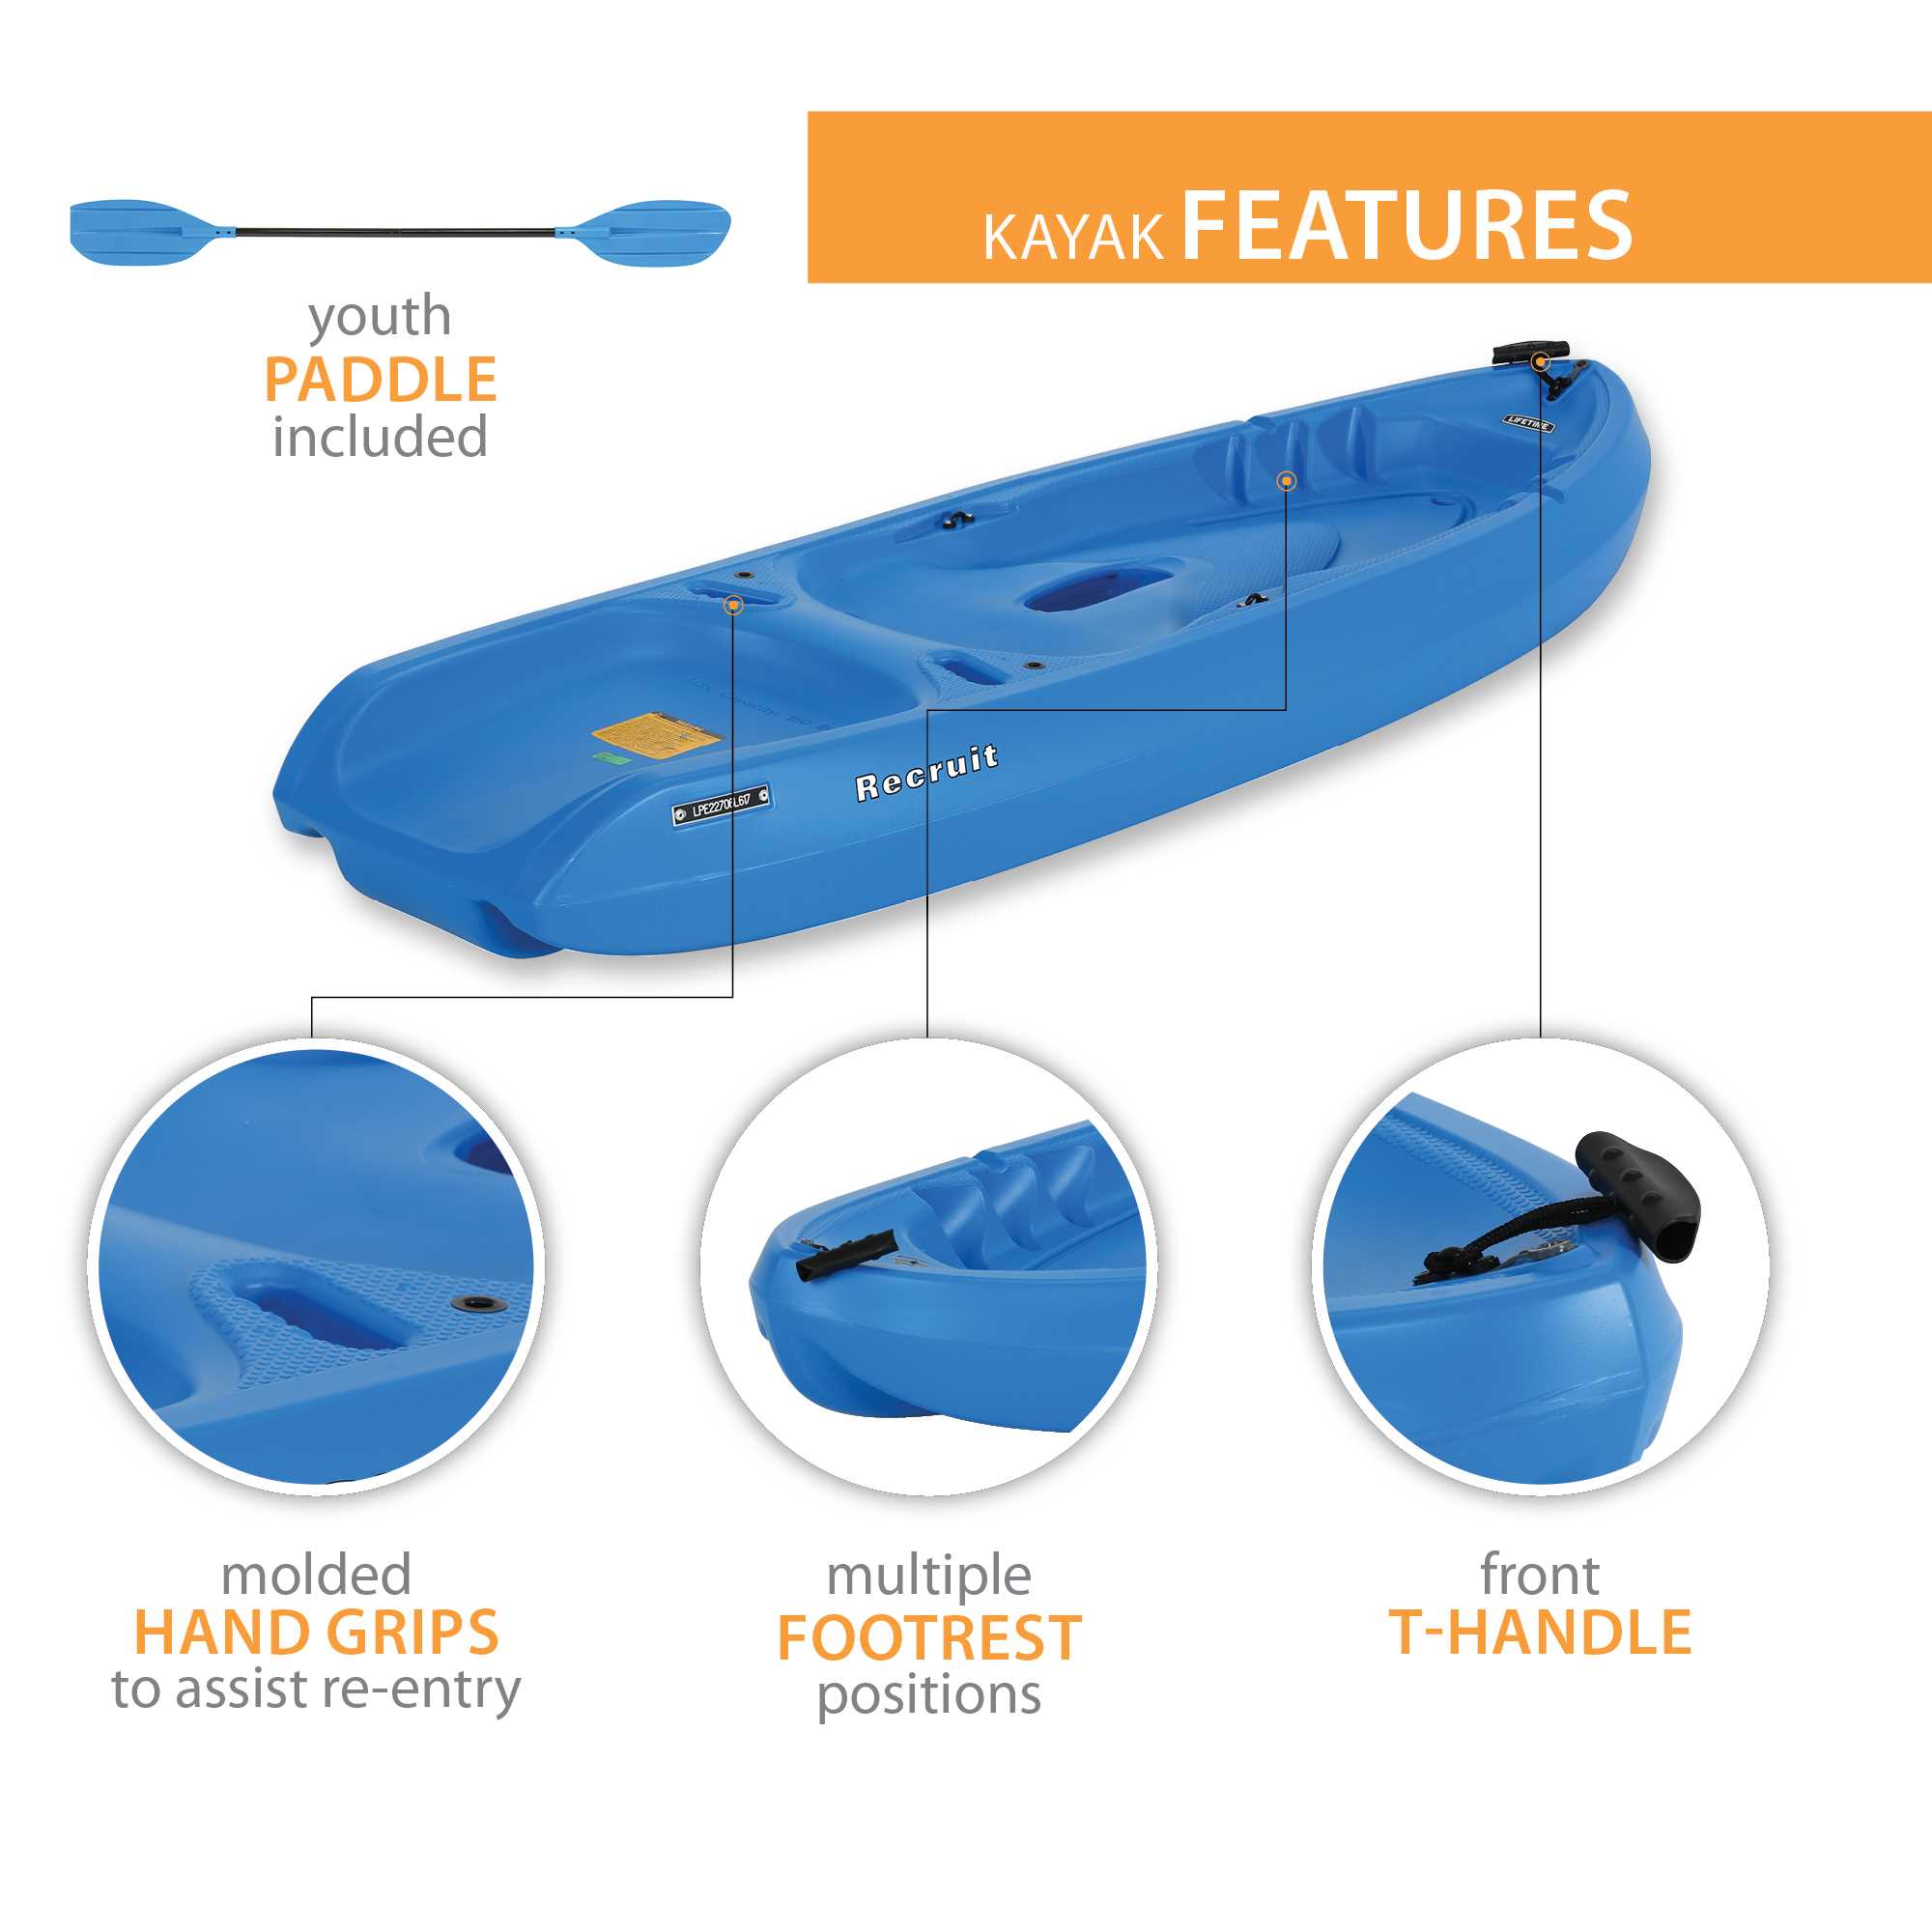 Lifetime Recruit 6.5 ft Youth Sit-on-Top Kayak, Dragonfly Blue (90746) - image 5 of 14